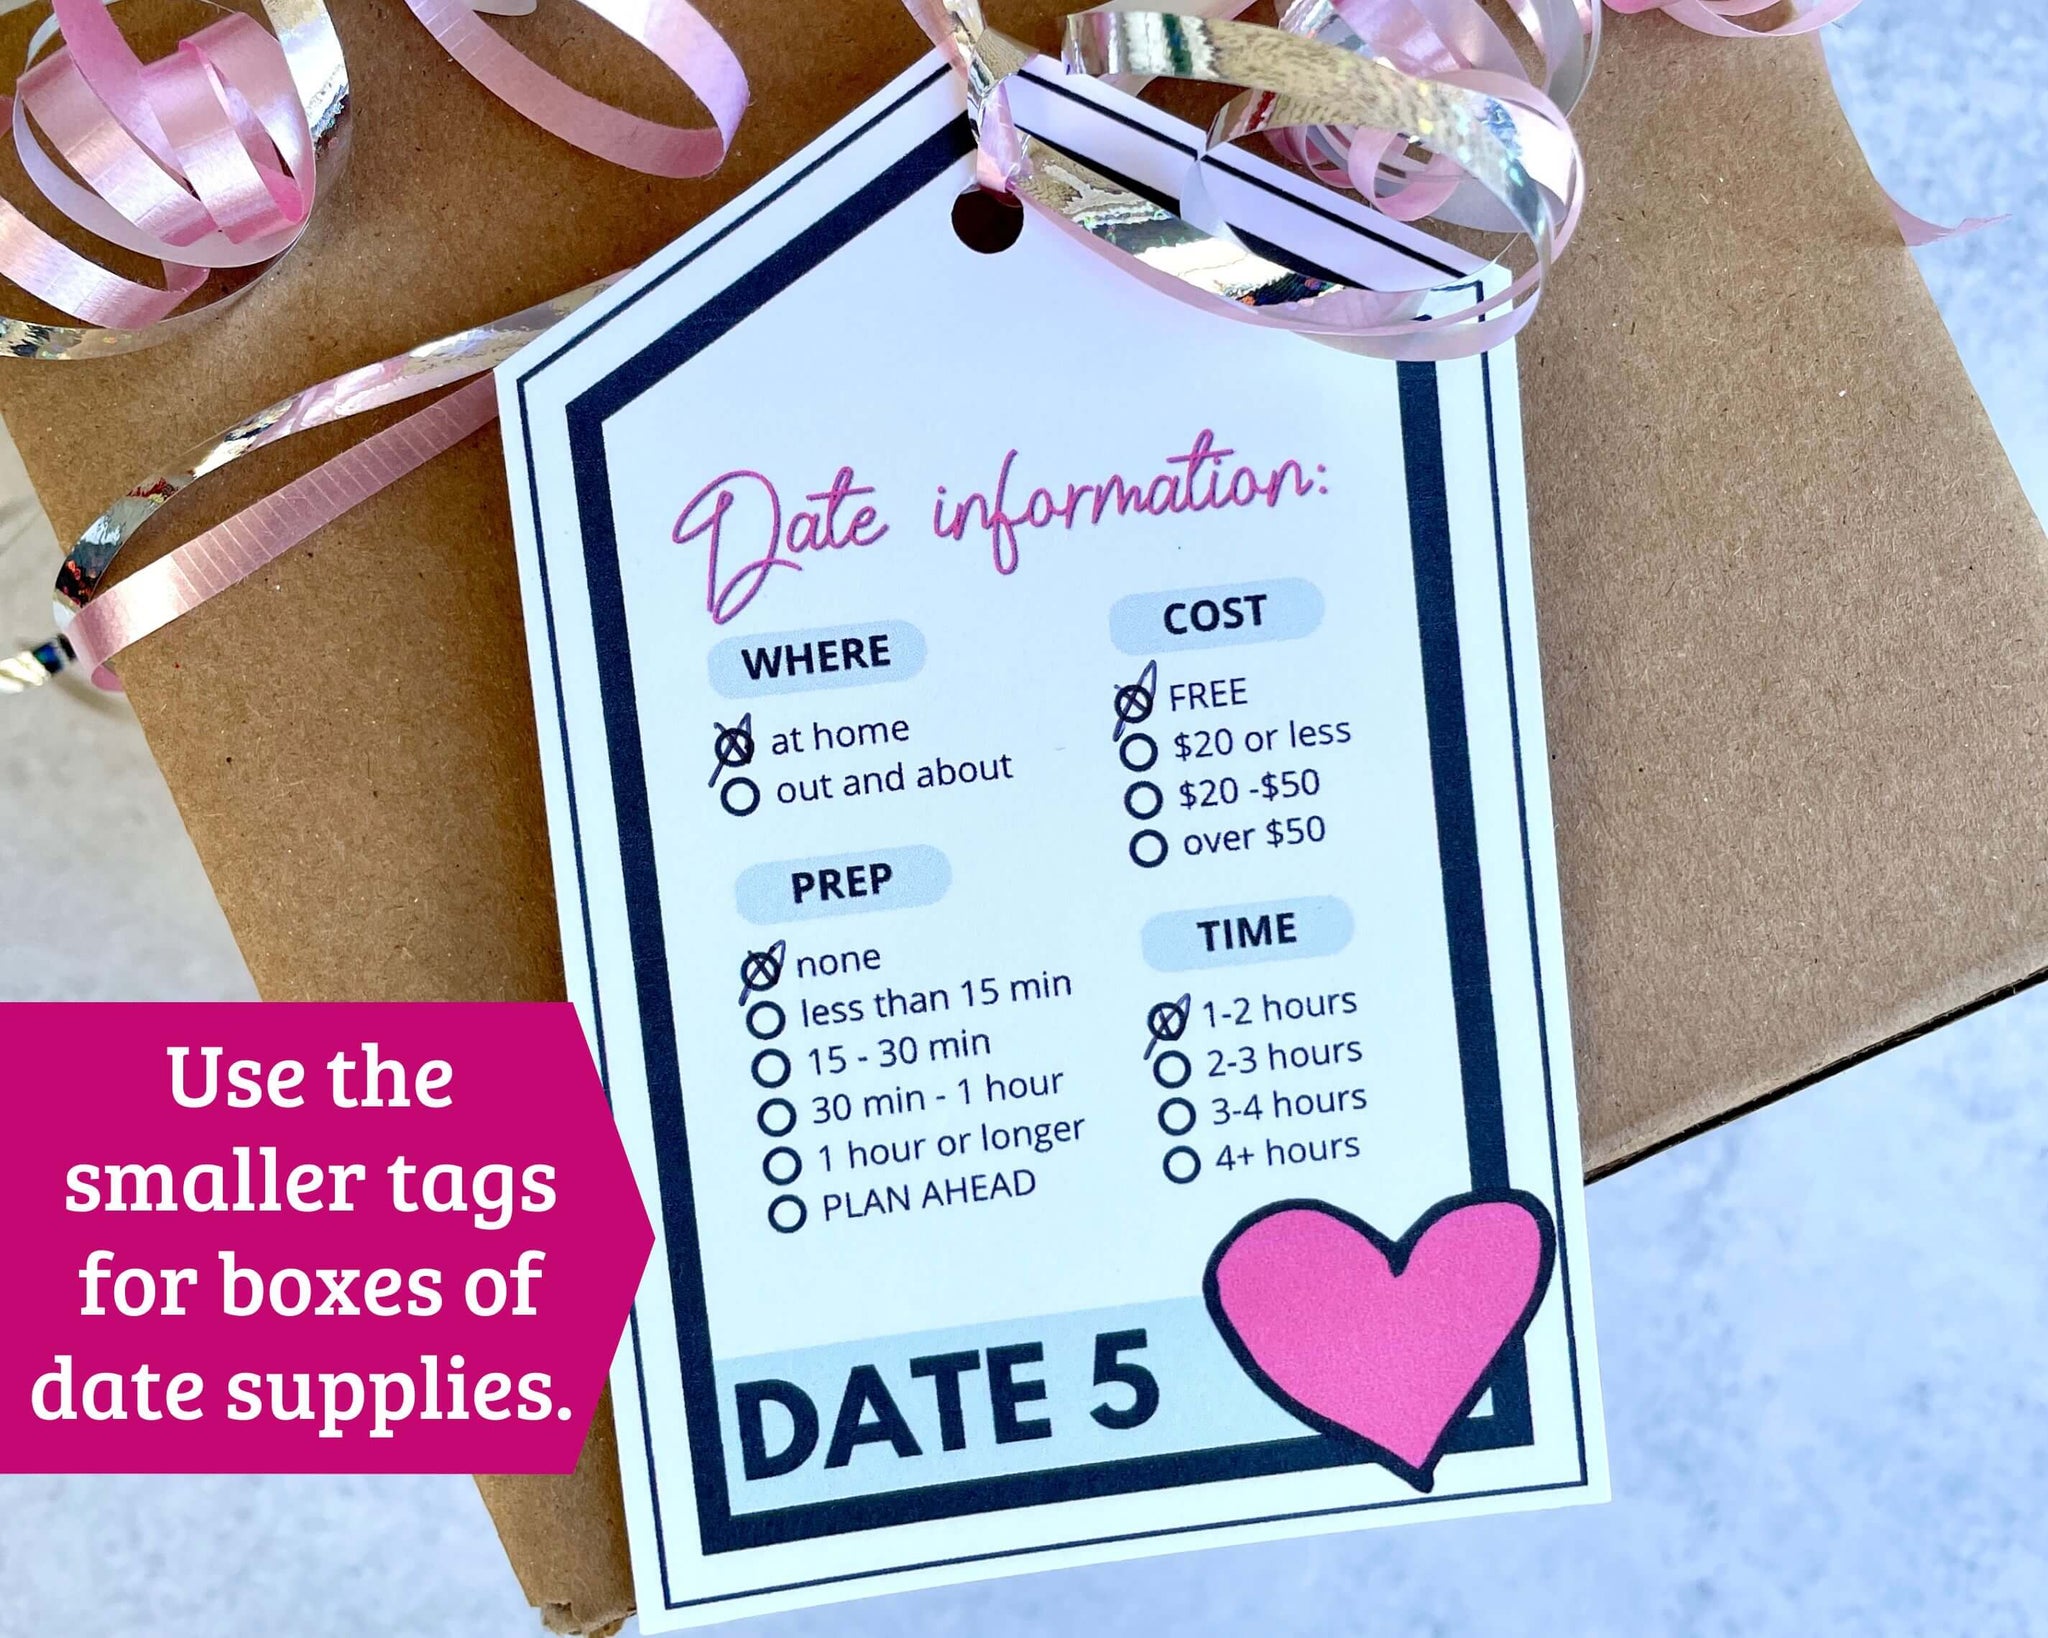 Free Printable} Give DATE NIGHT for a Wedding Gift